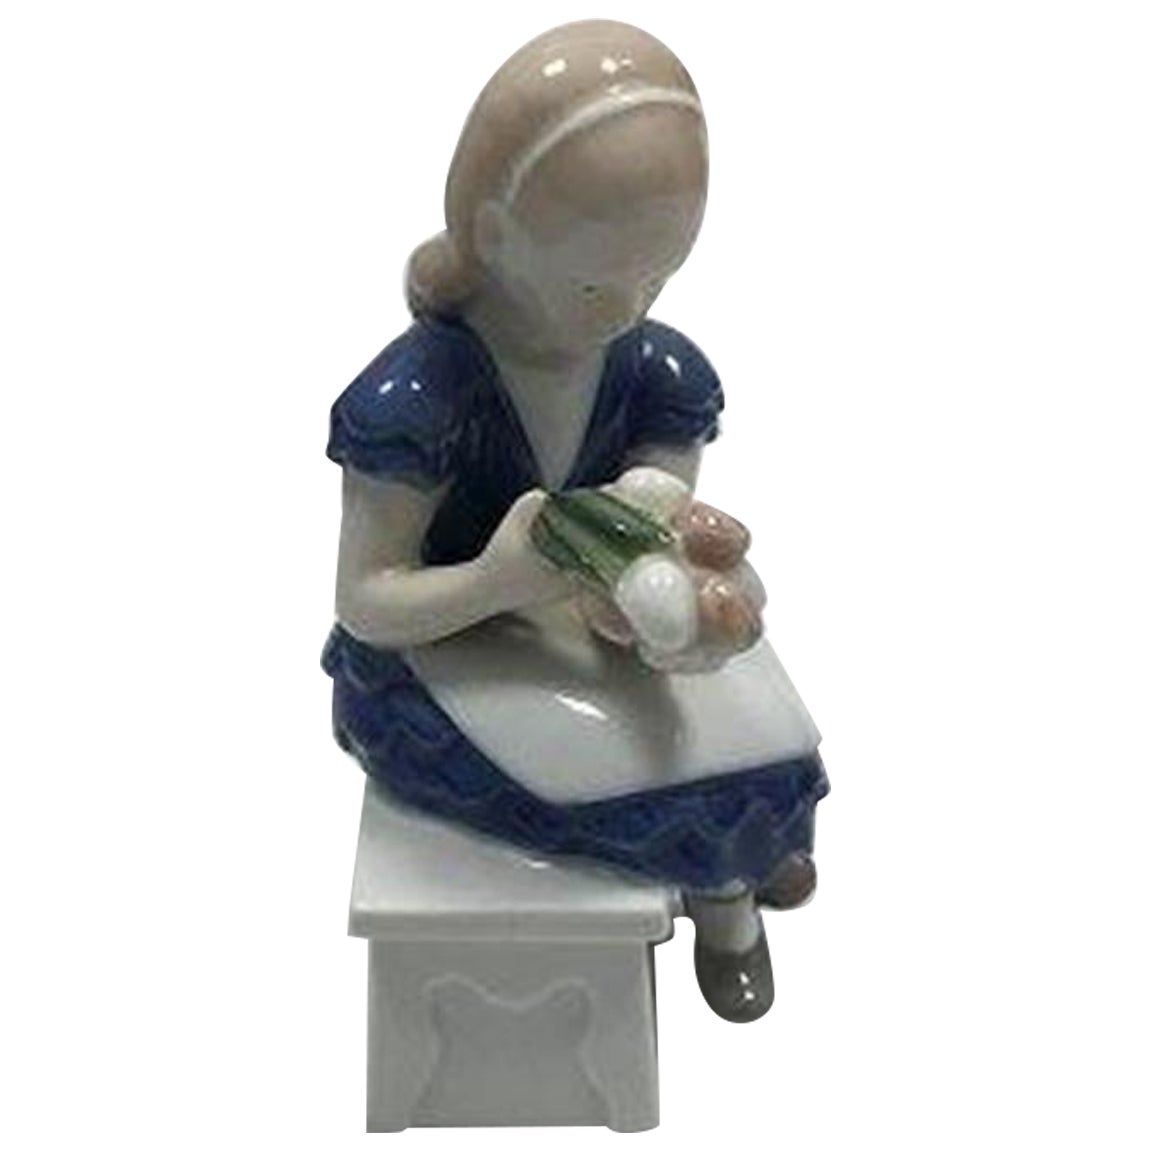 Bing & Grondahl Figure of "The Little Idas Flowers" No 2298 For Sale